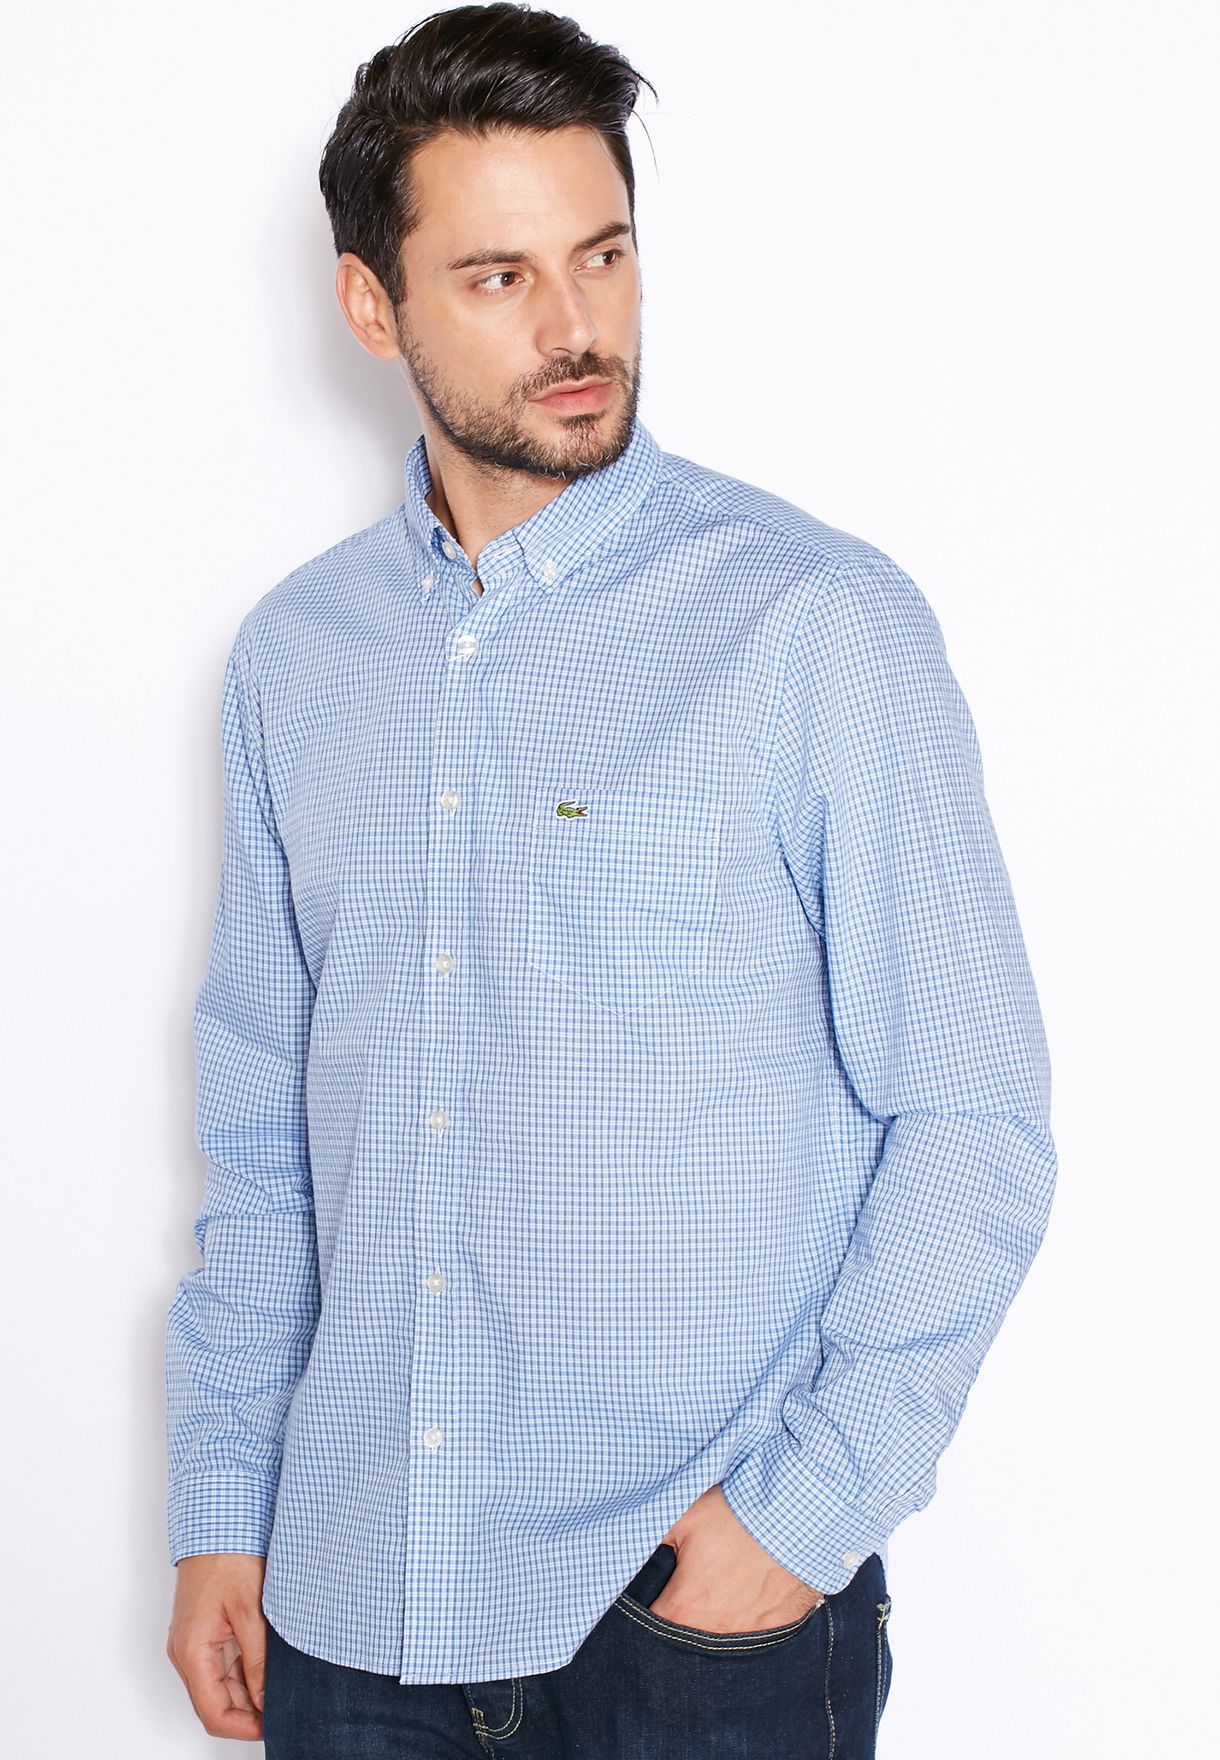 lacoste gingham shirt